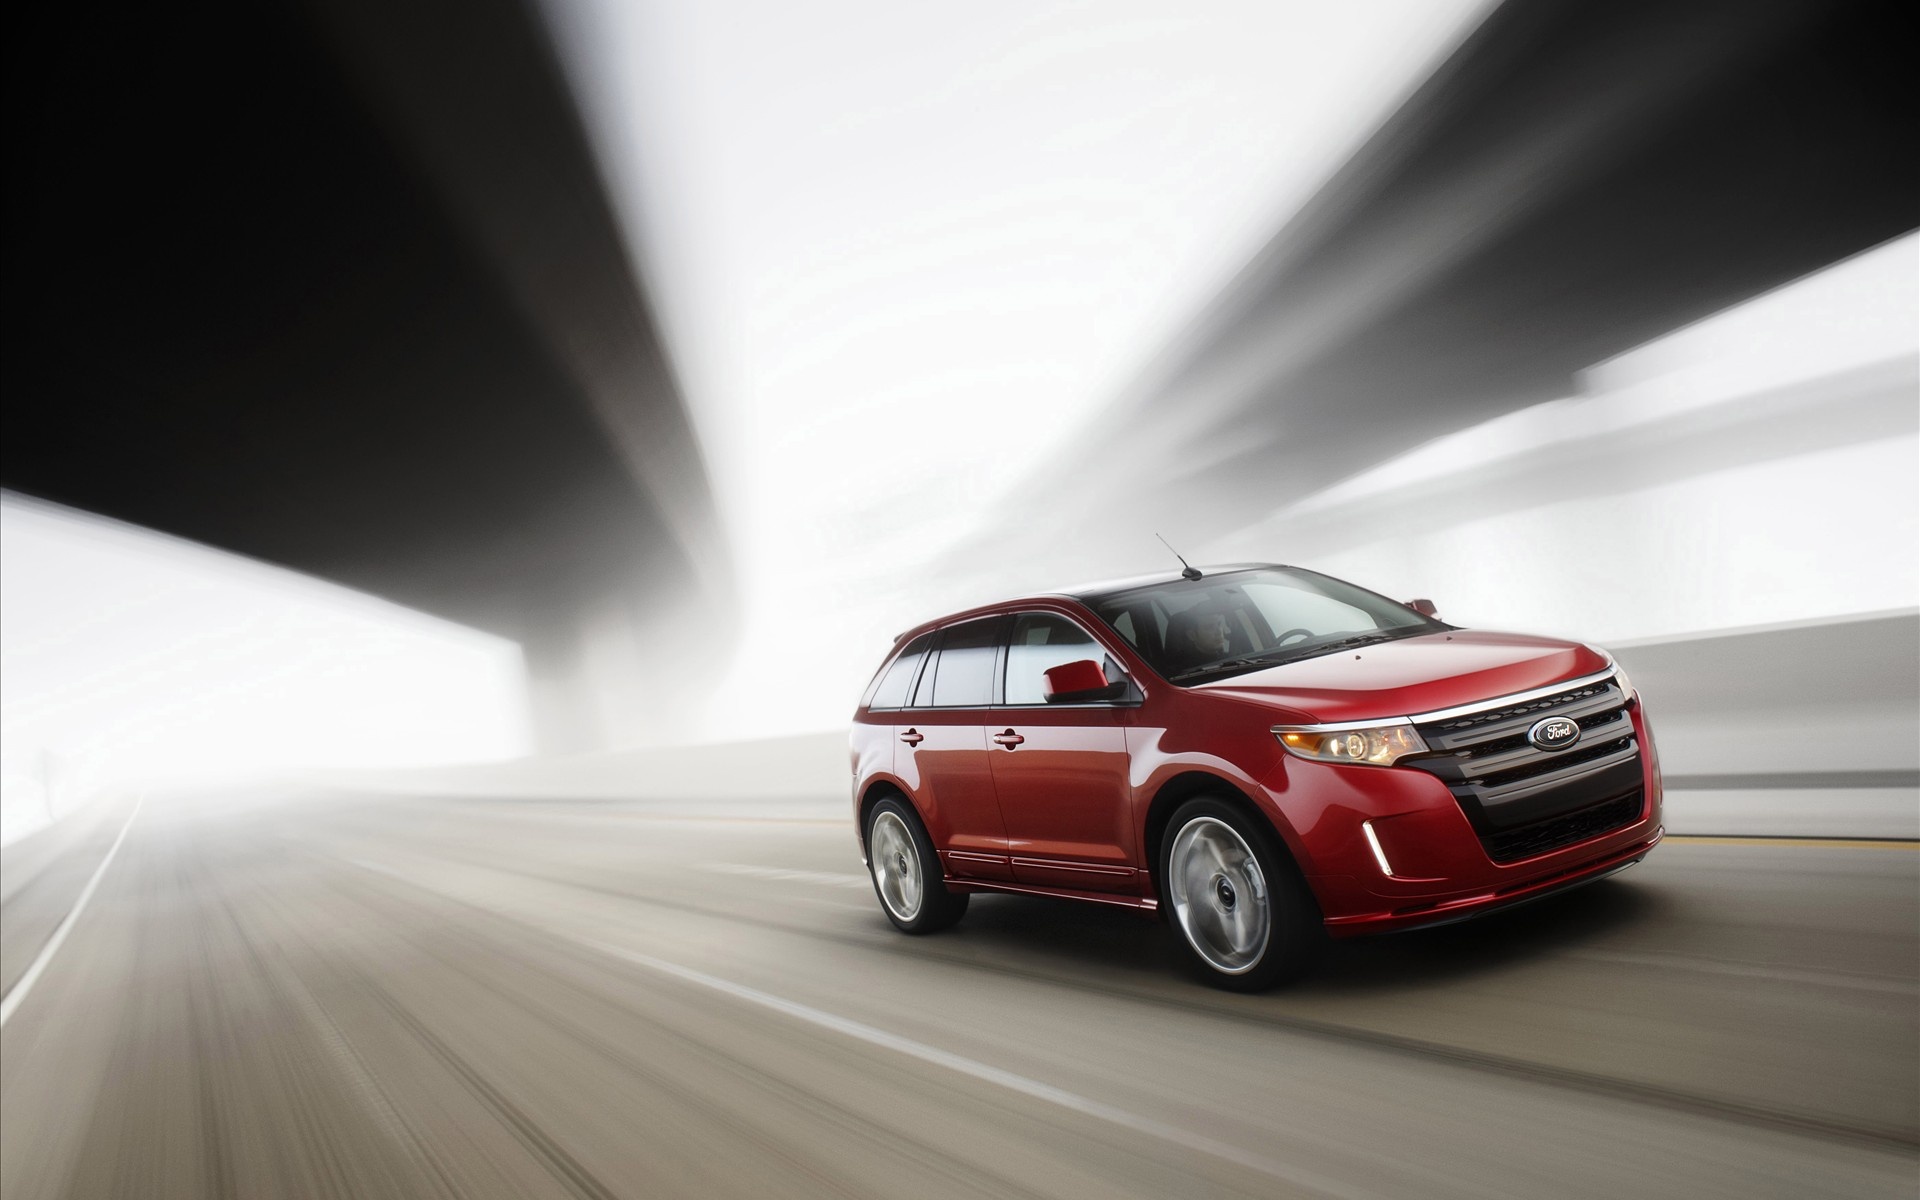 Vehicles Ford Edge HD Wallpaper | Background Image